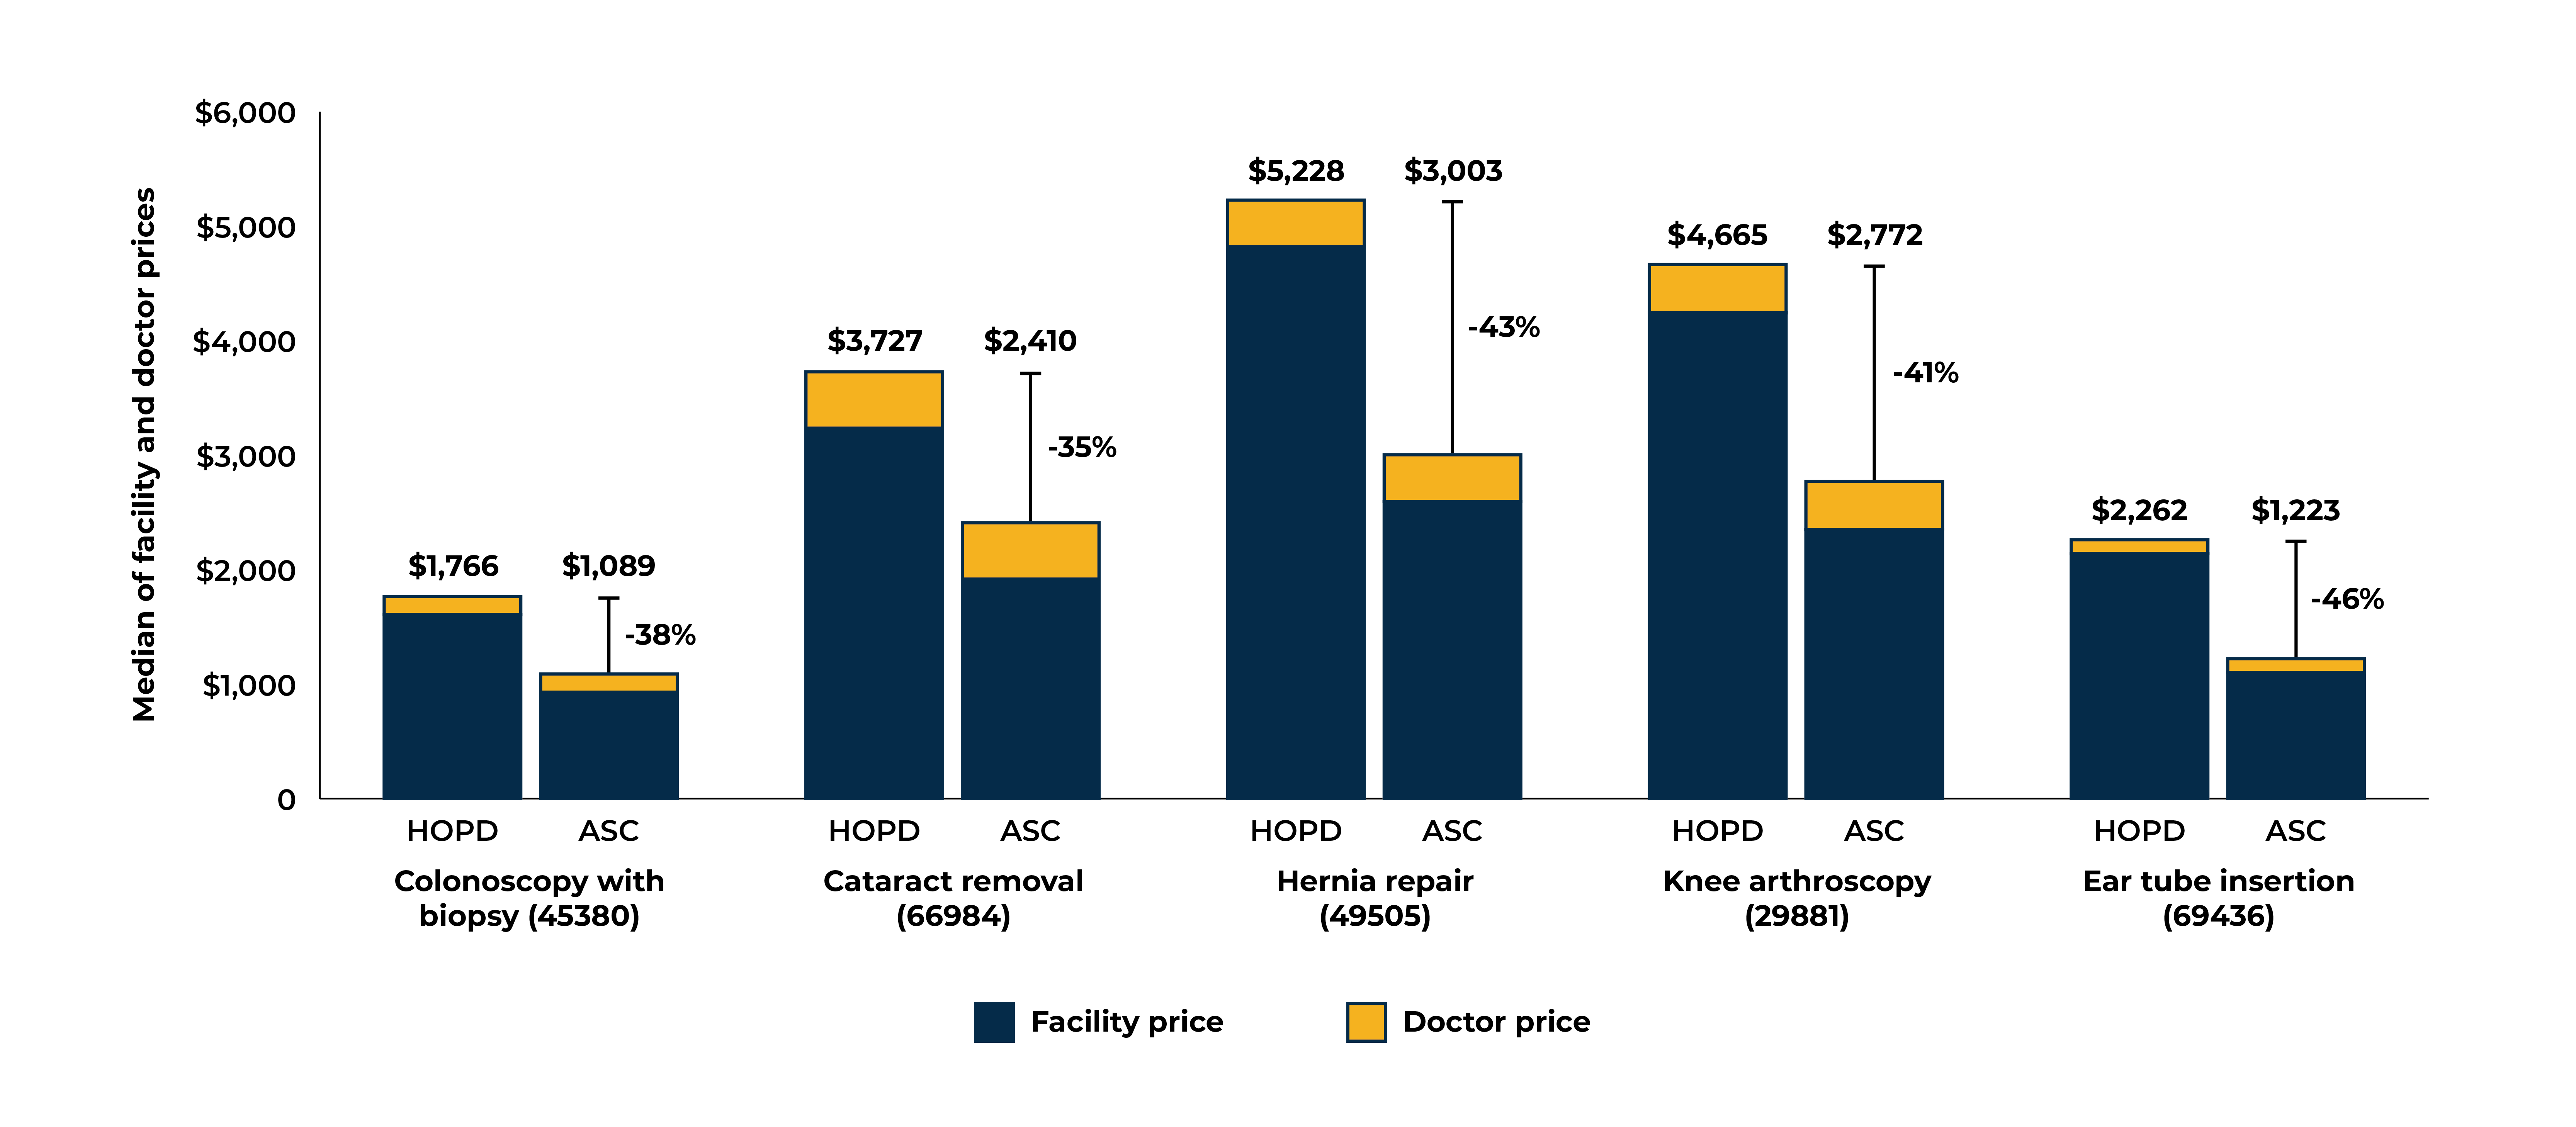 Shifting care from HOPDs to ASCs would lead to considerable savings. 